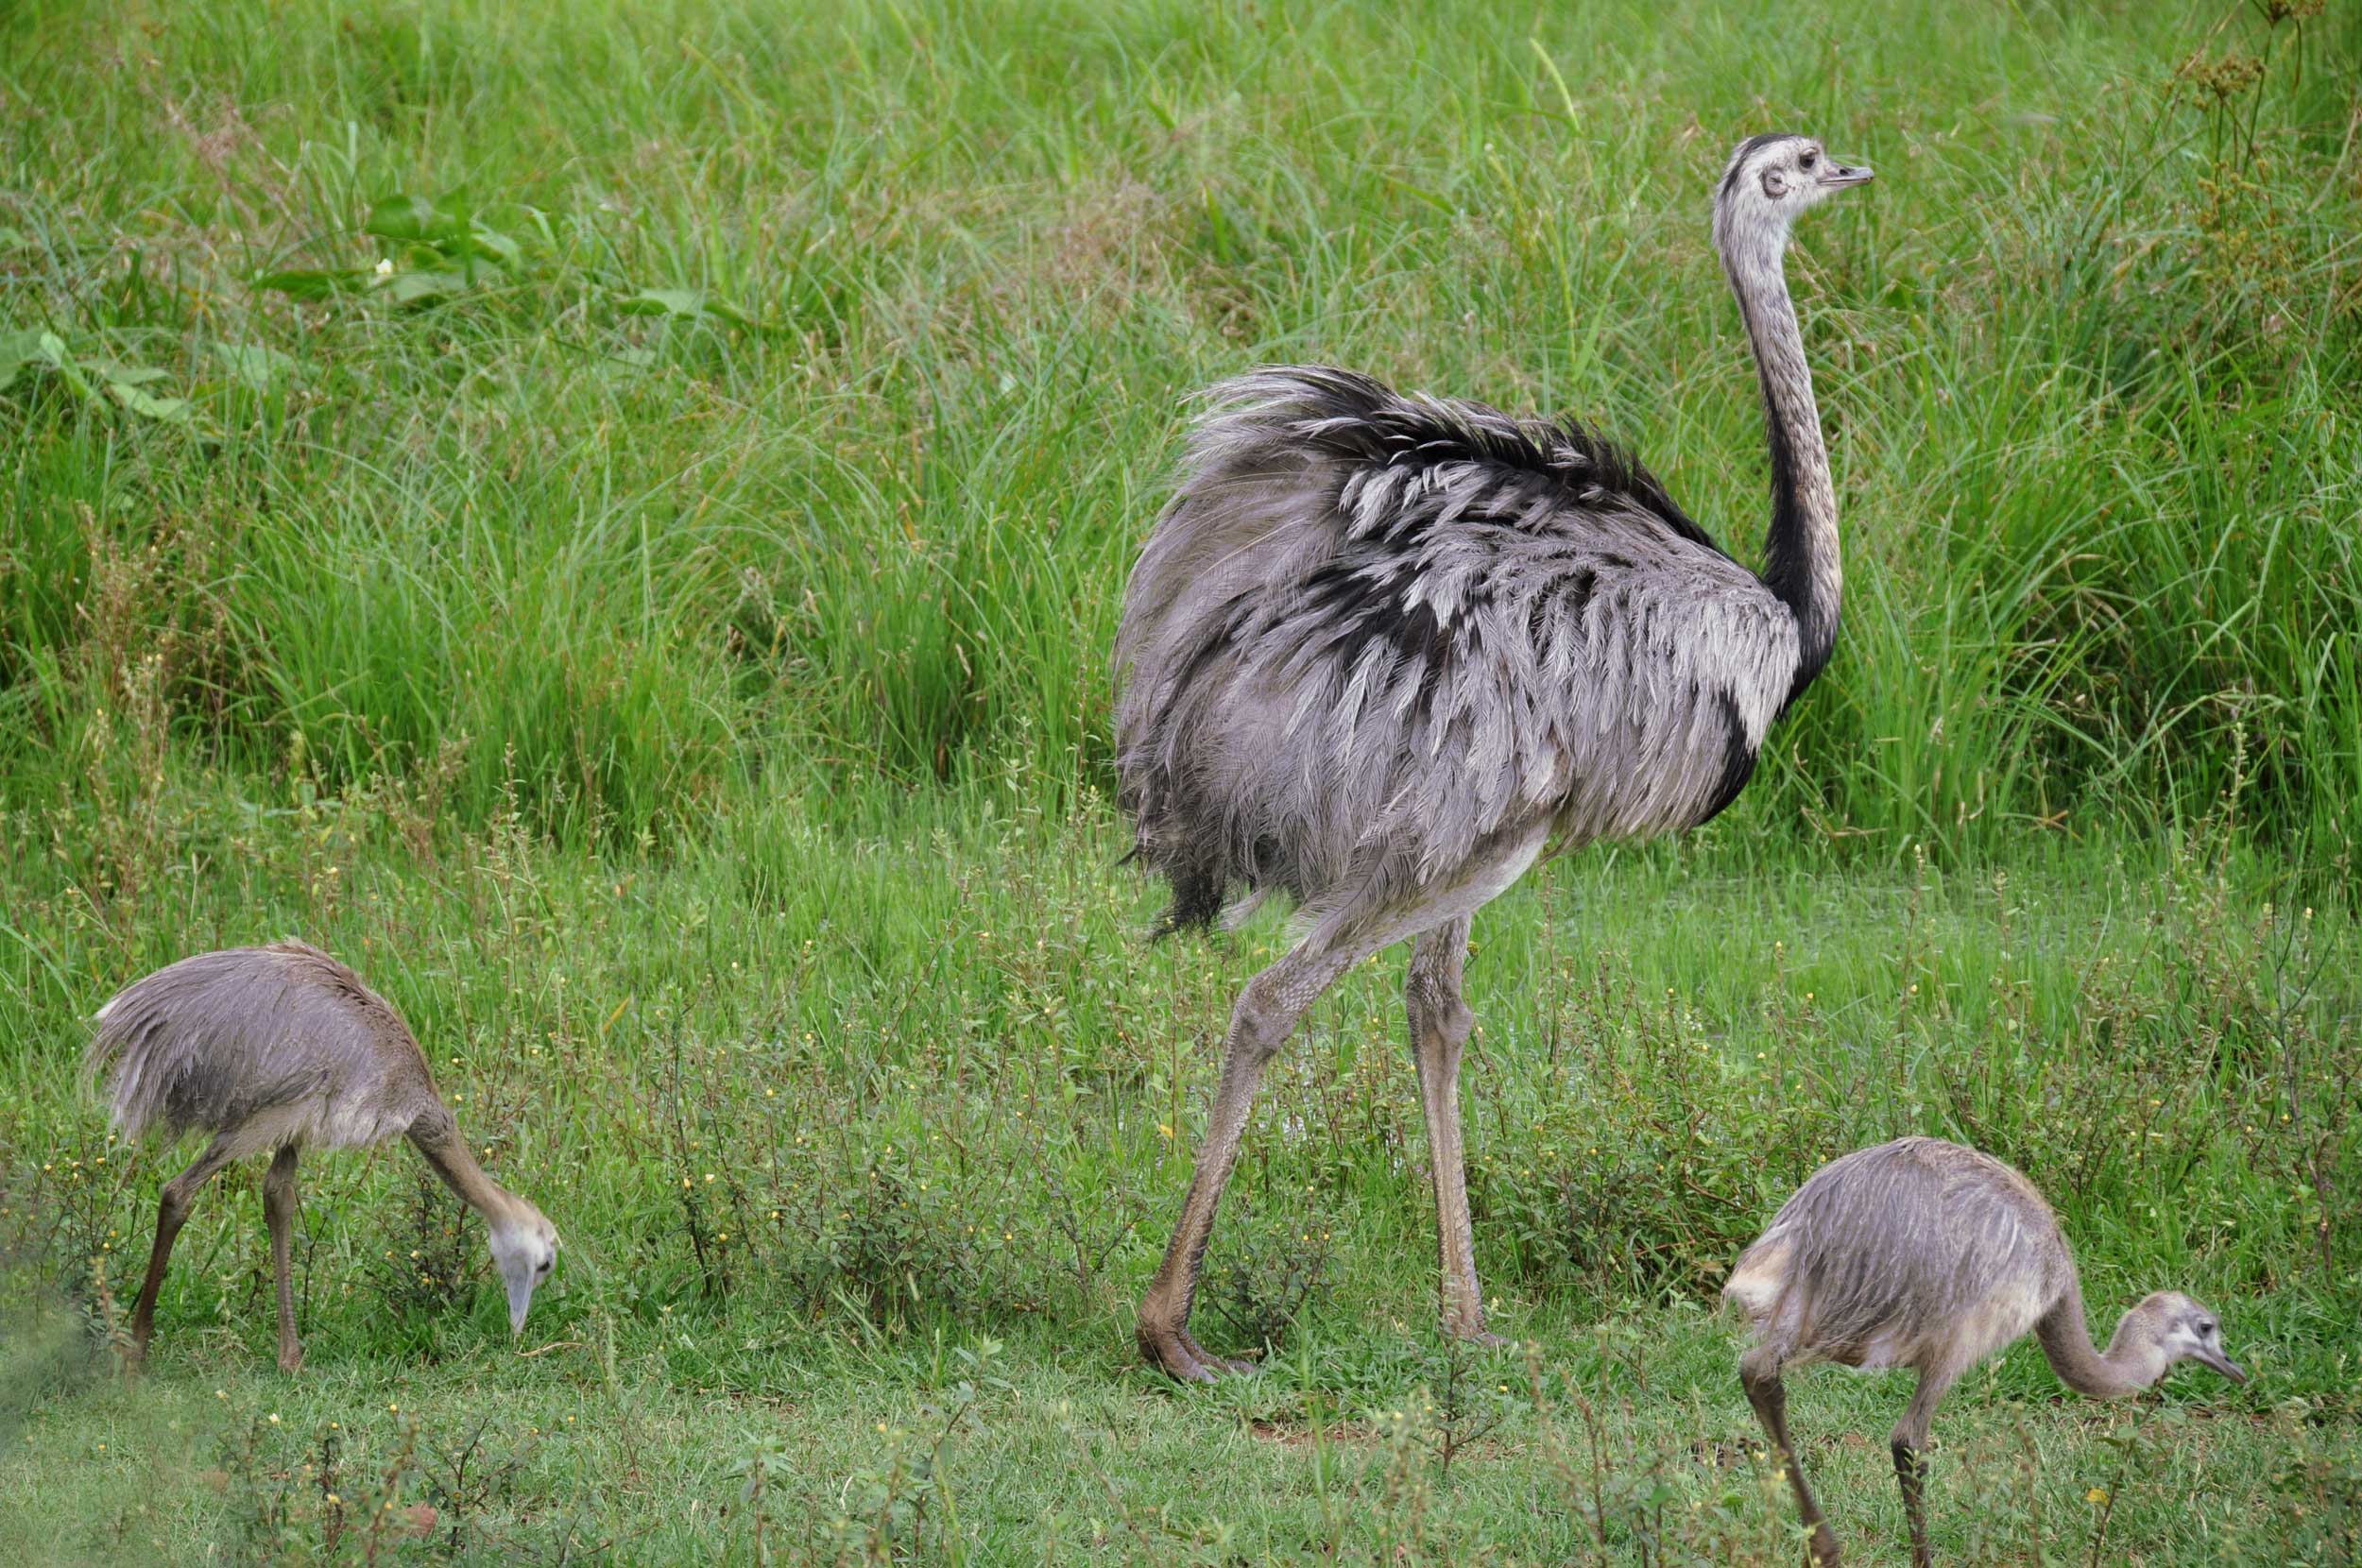 A large, grey mother bird with two half-grown chicks, Argentina